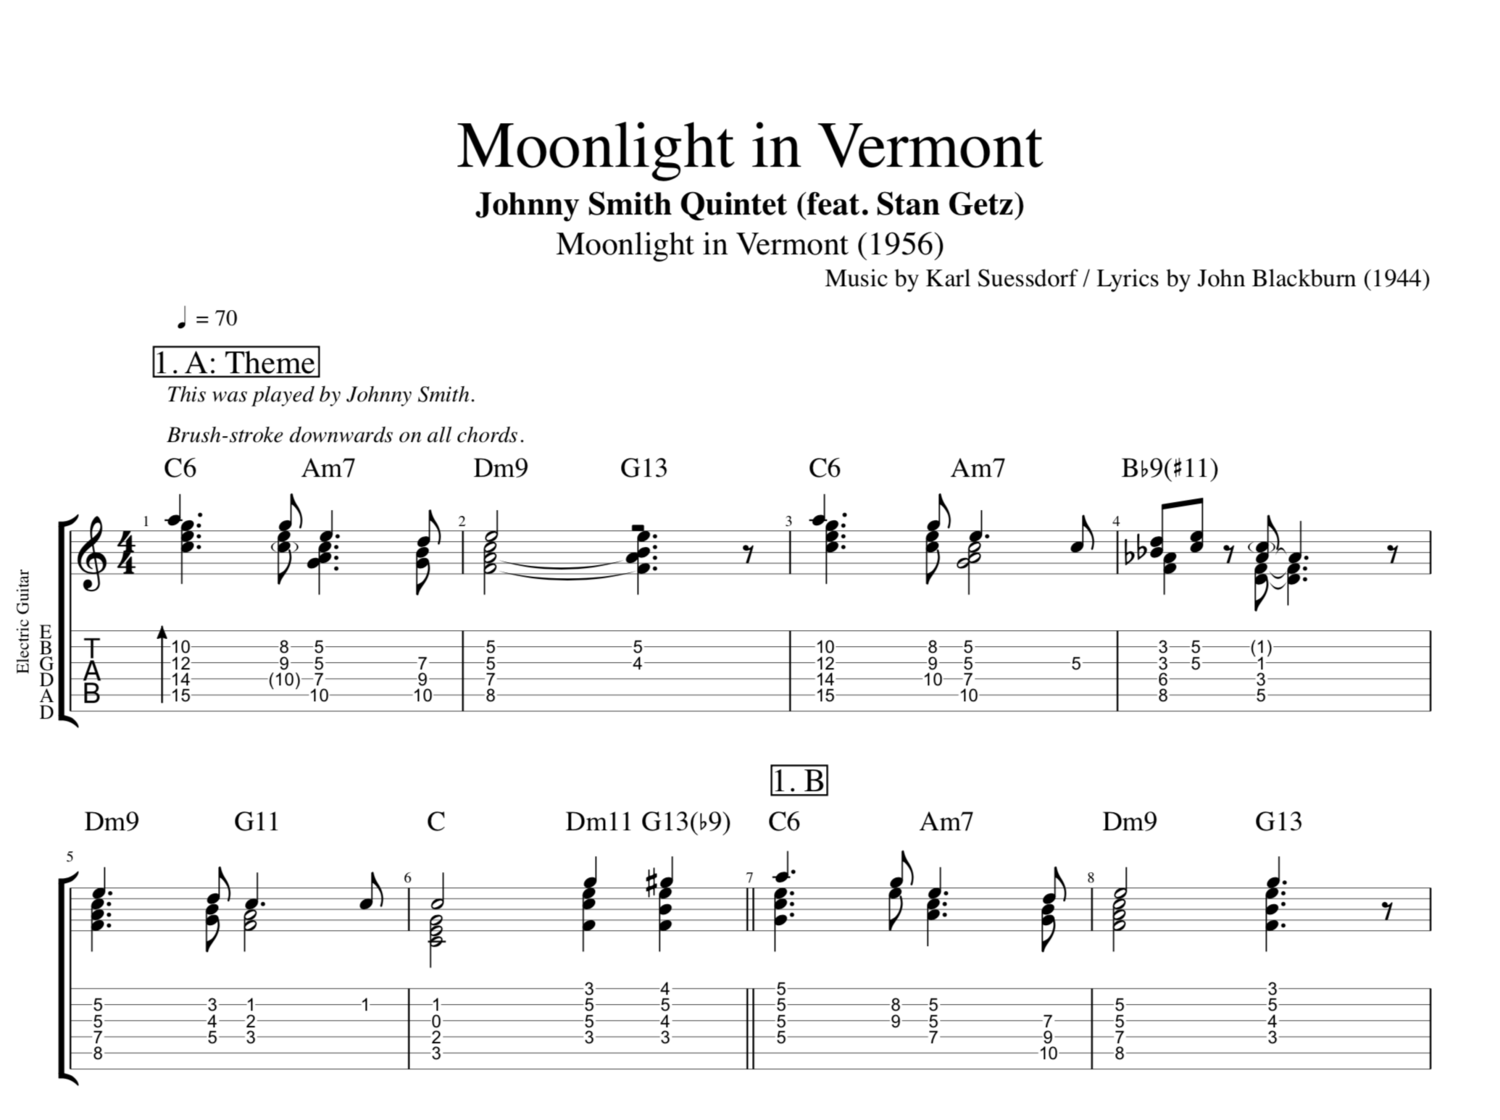 II. 7 et 8 CORDES, Guitar&Bass, impro/compo, investigations / 5 Fingers No Nail Moonlight+in+Vermont+G+Johnny+Smith+Stan+Getz+guitar+tab+tabs+chords+double+bass+jazz+saxophone+tenor+transcription+chords+sheet+music